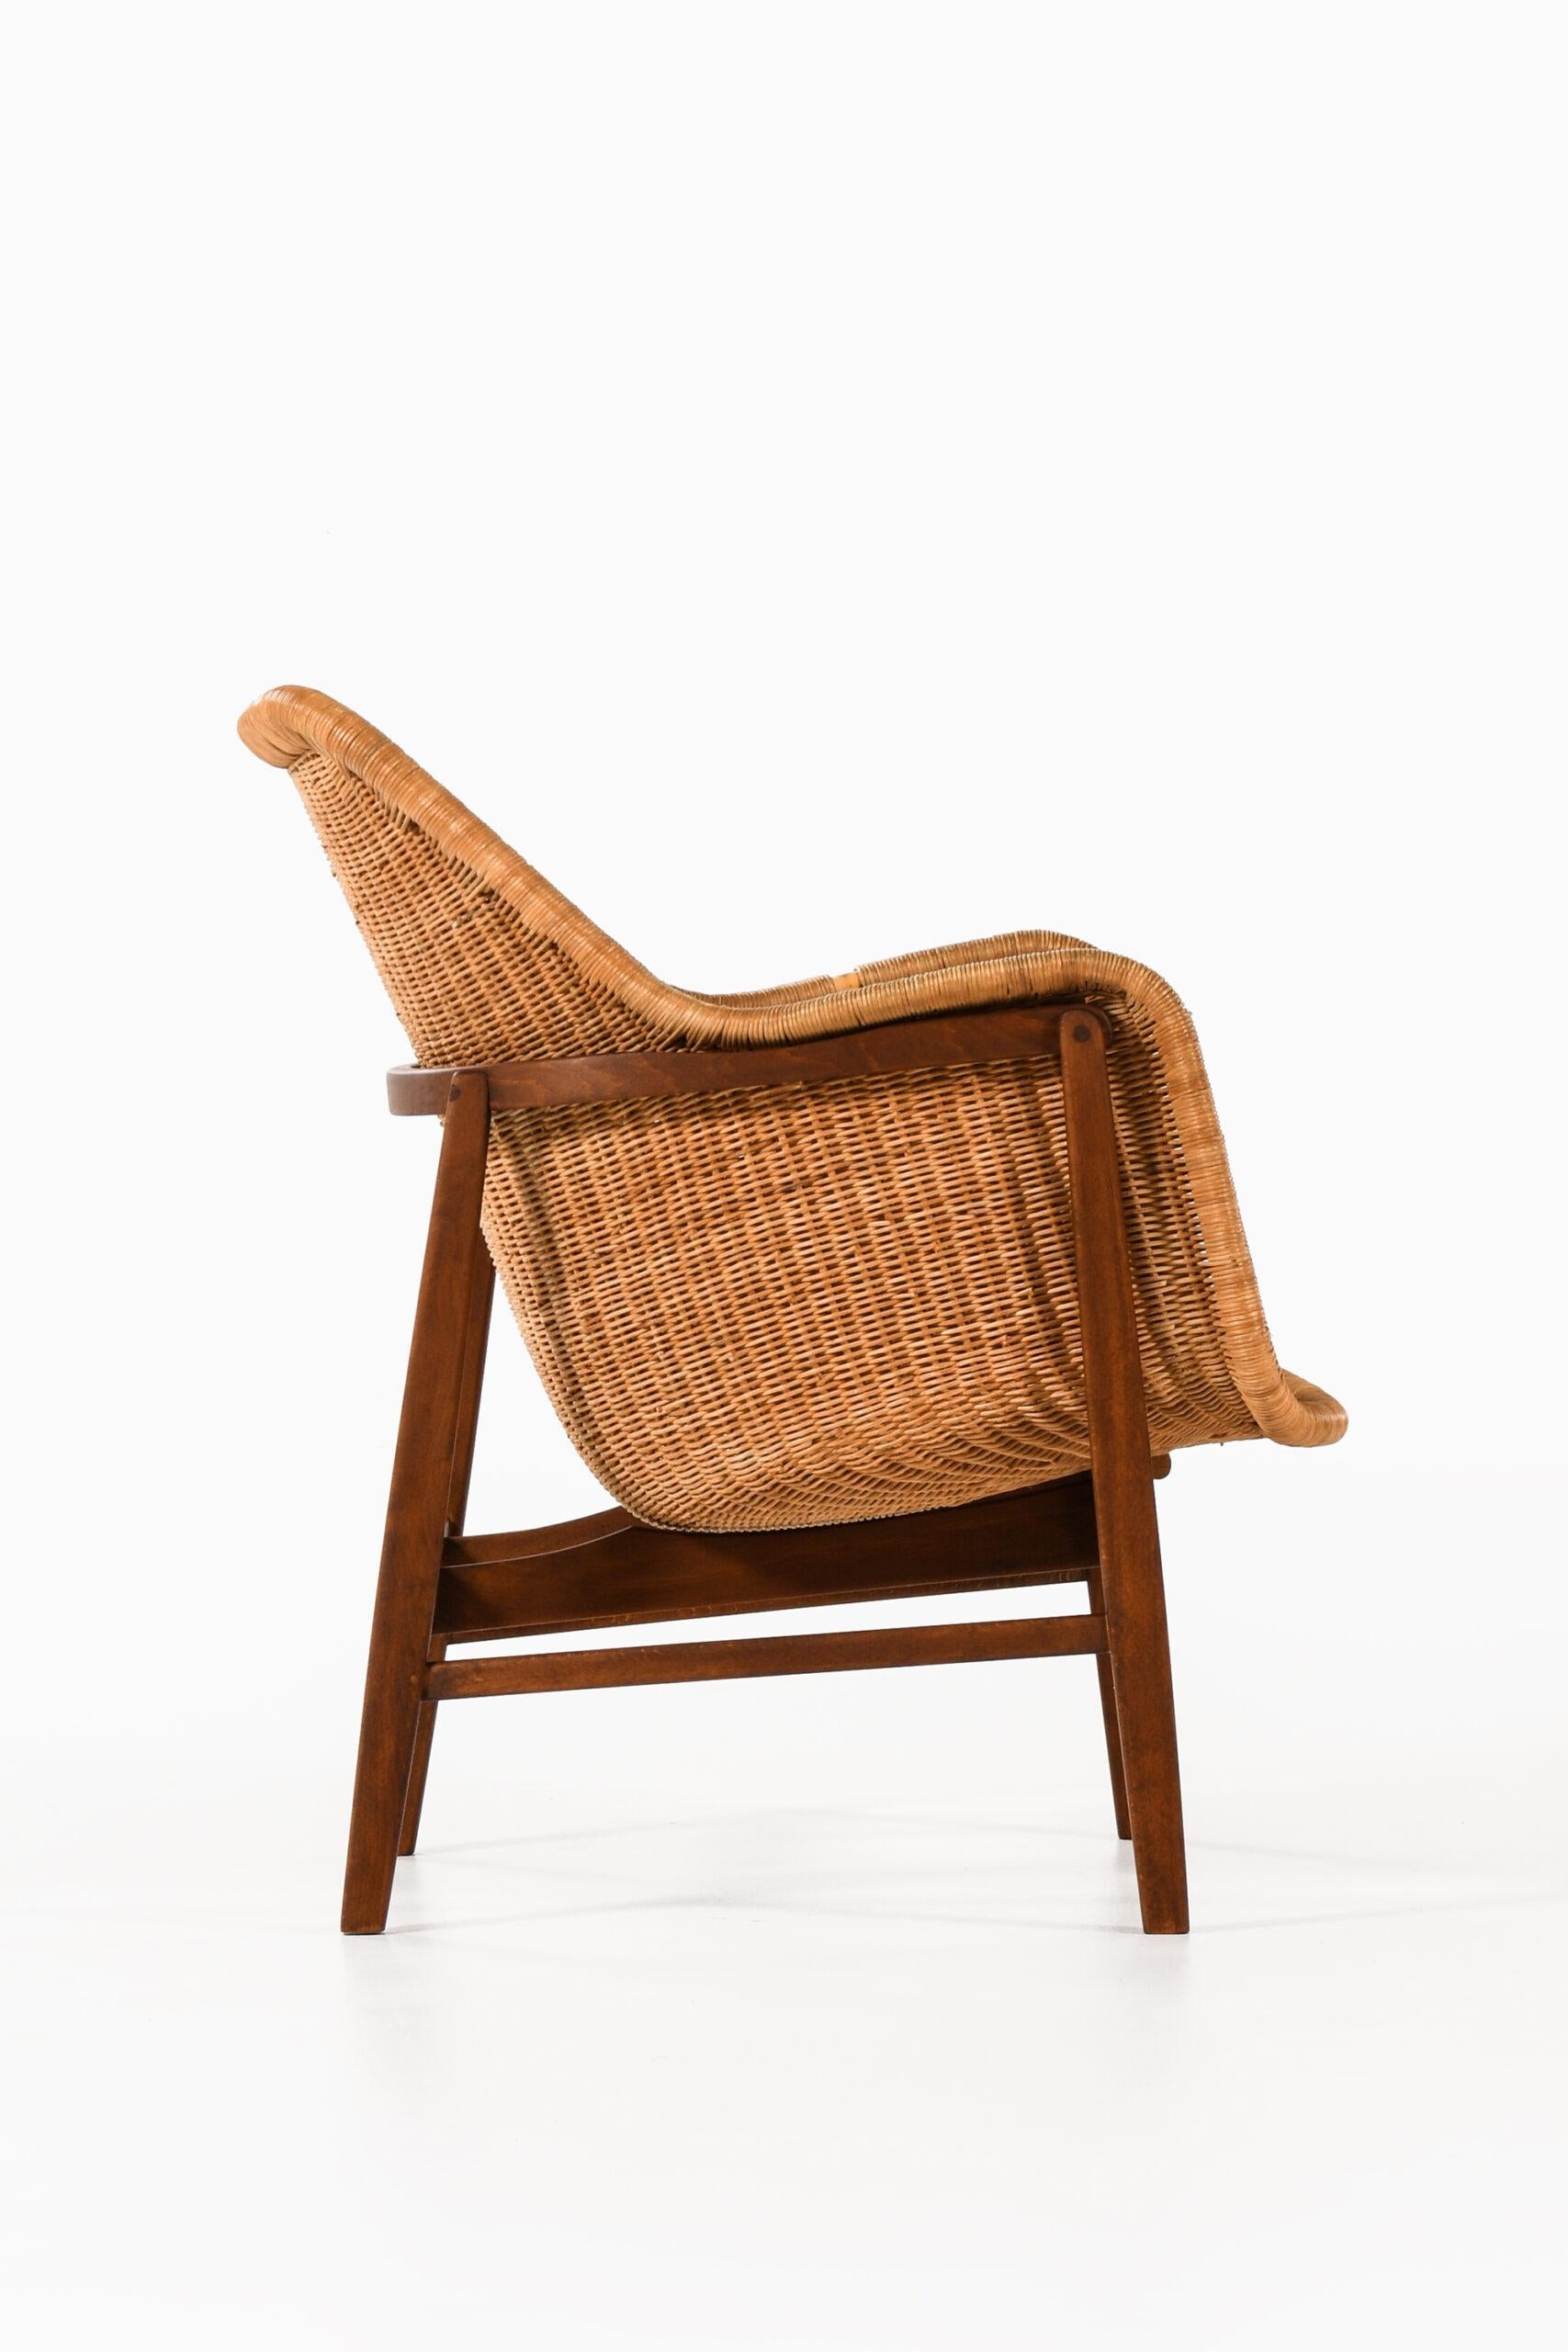 Mid-20th Century Bertil Fridhagen Easy Chair Produced by Bodafors For Sale